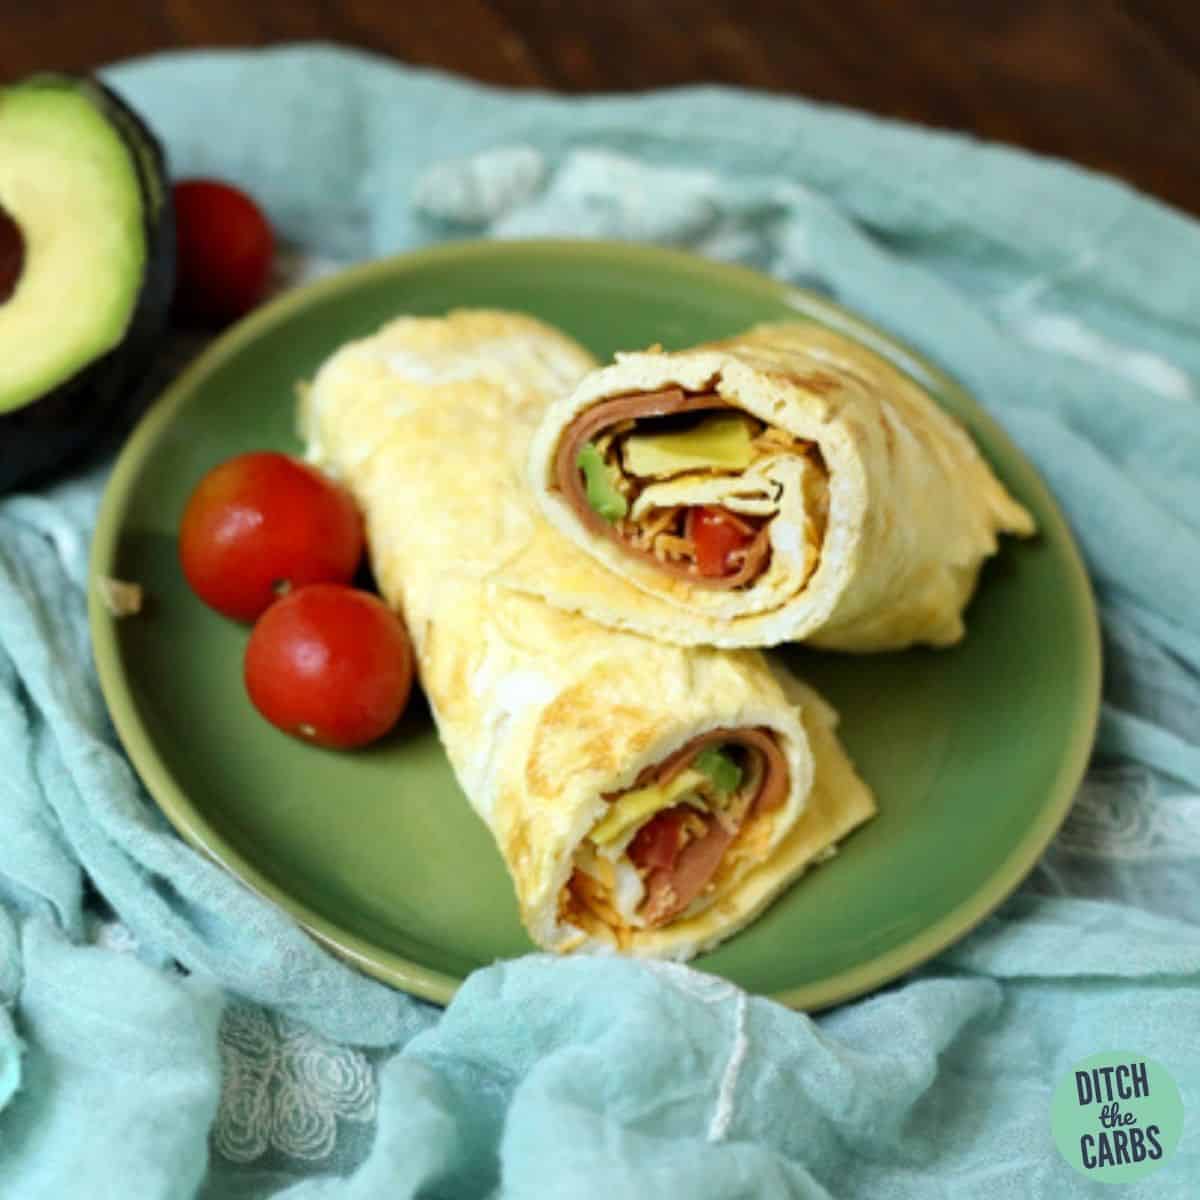 Keto Breakfast Egg Wrap in 5 Minutes! - The Hungry Elephant